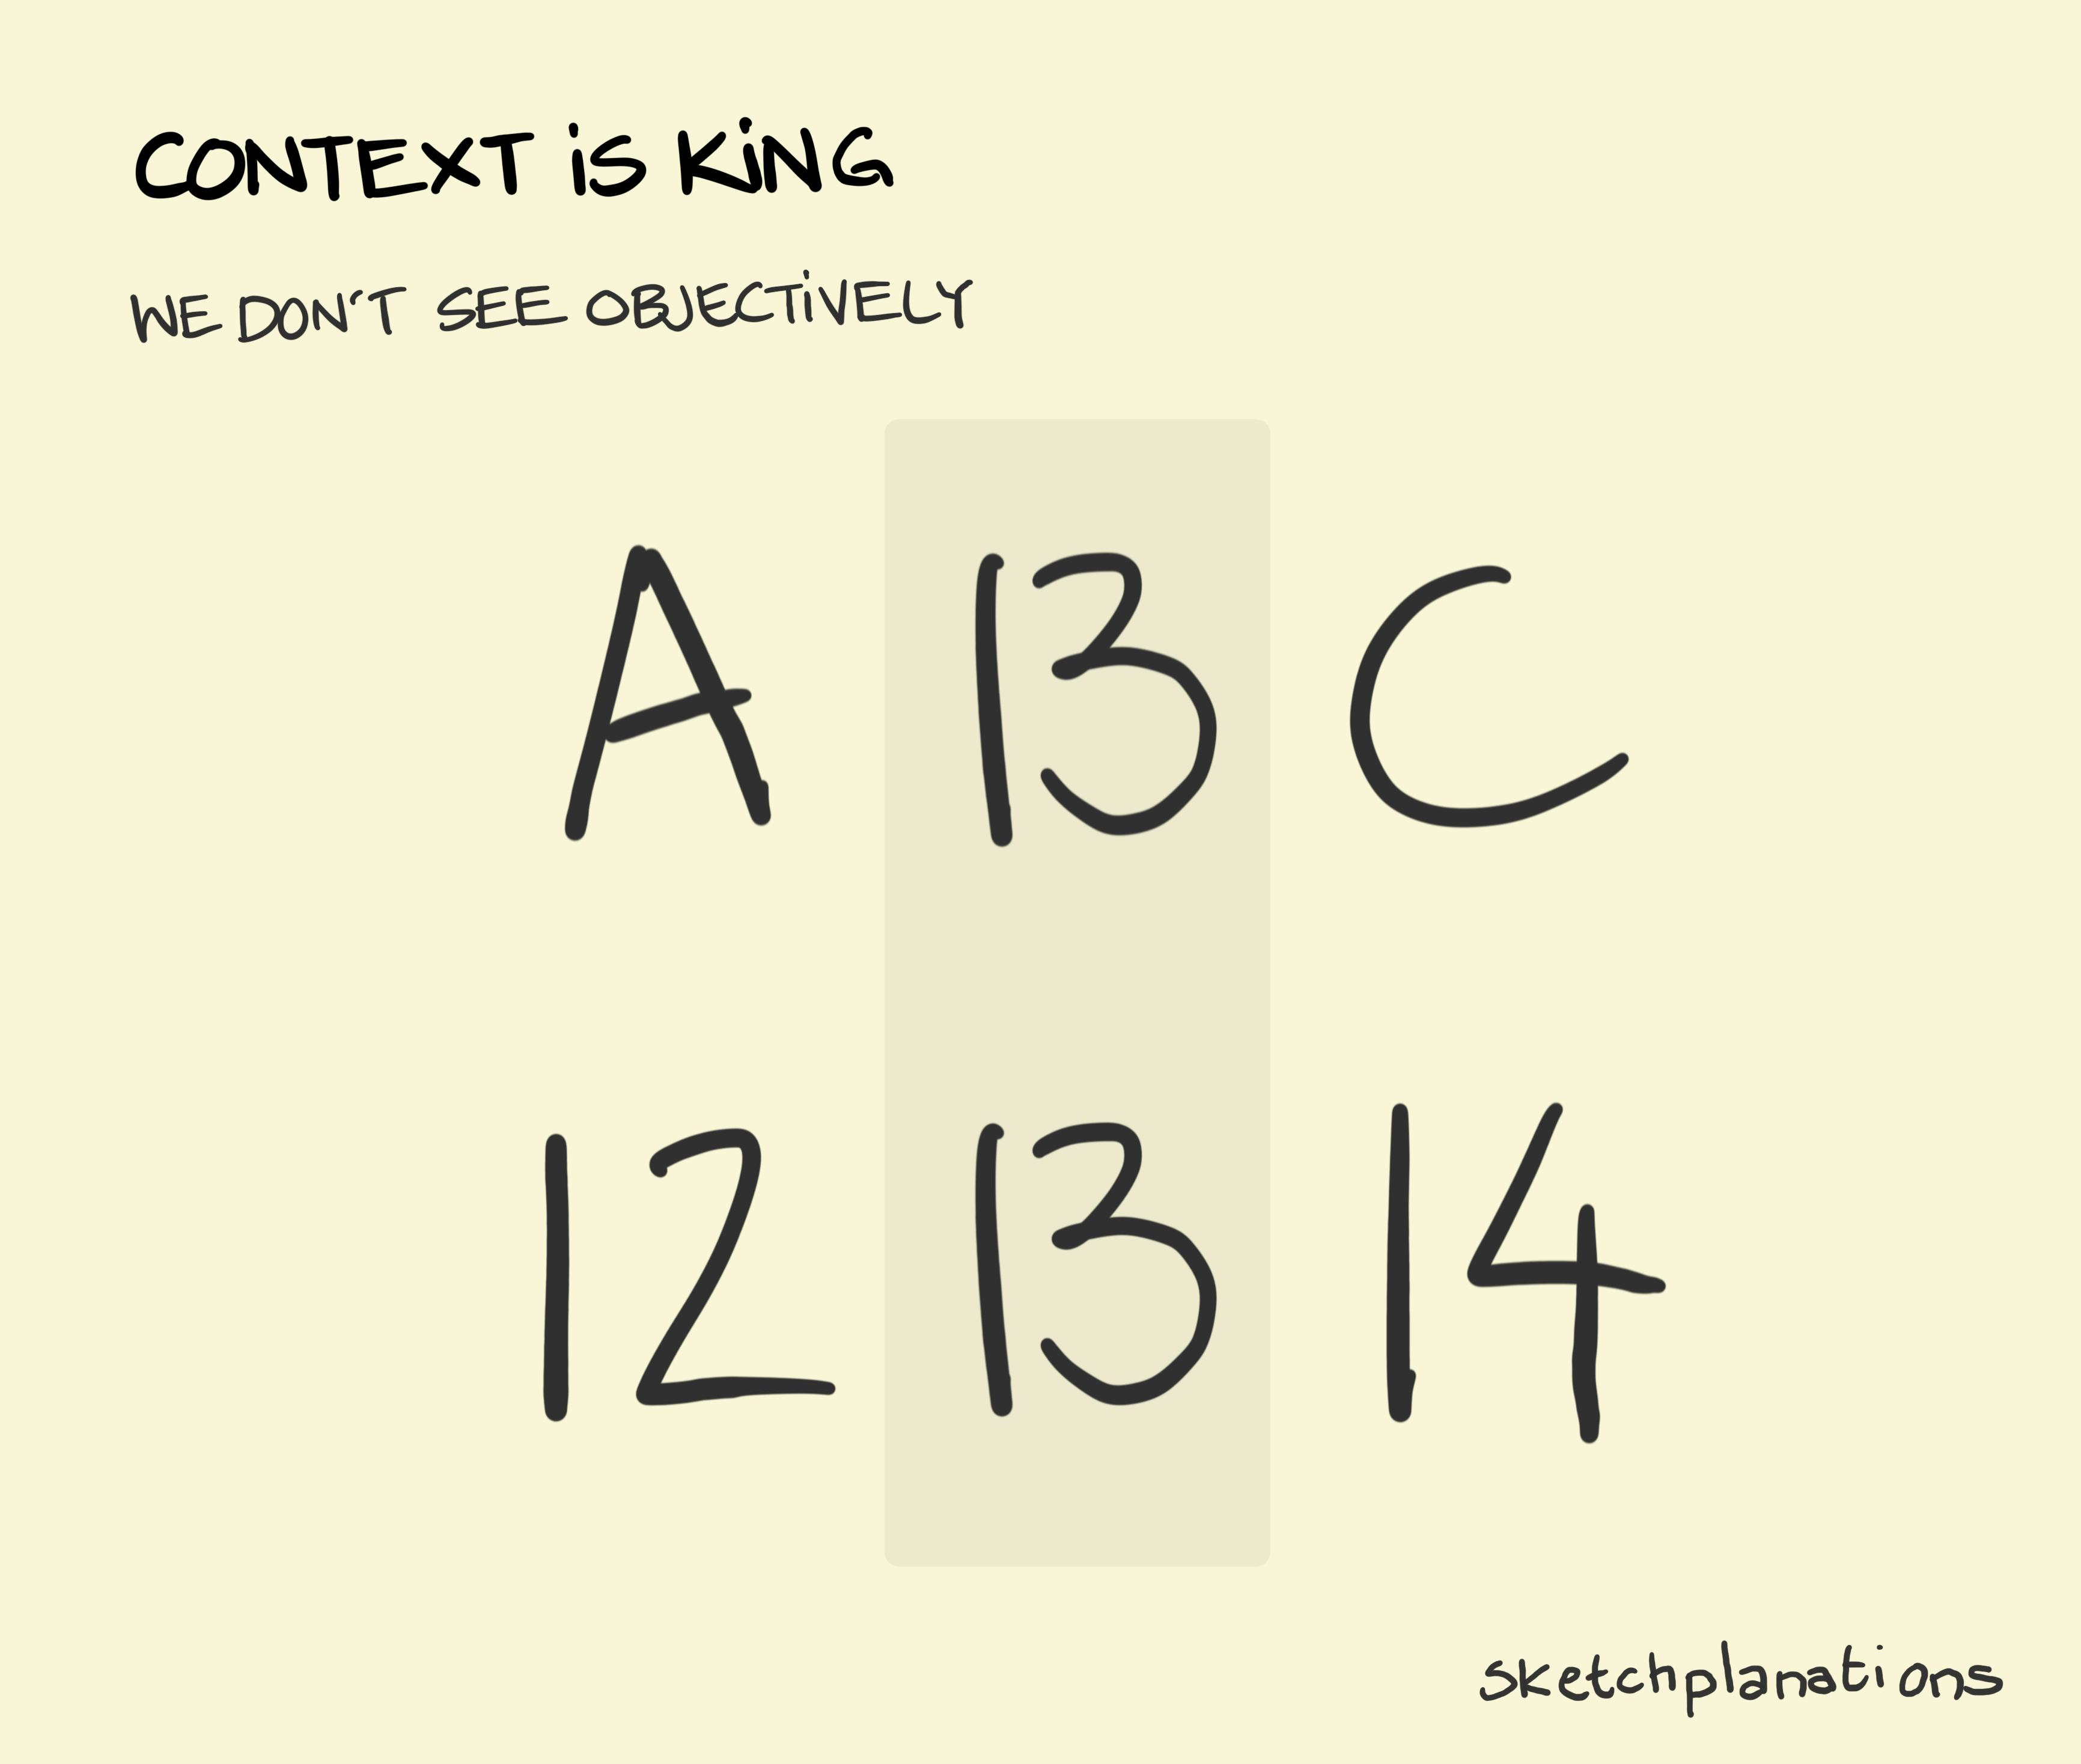 Context is king - Sketchplanations